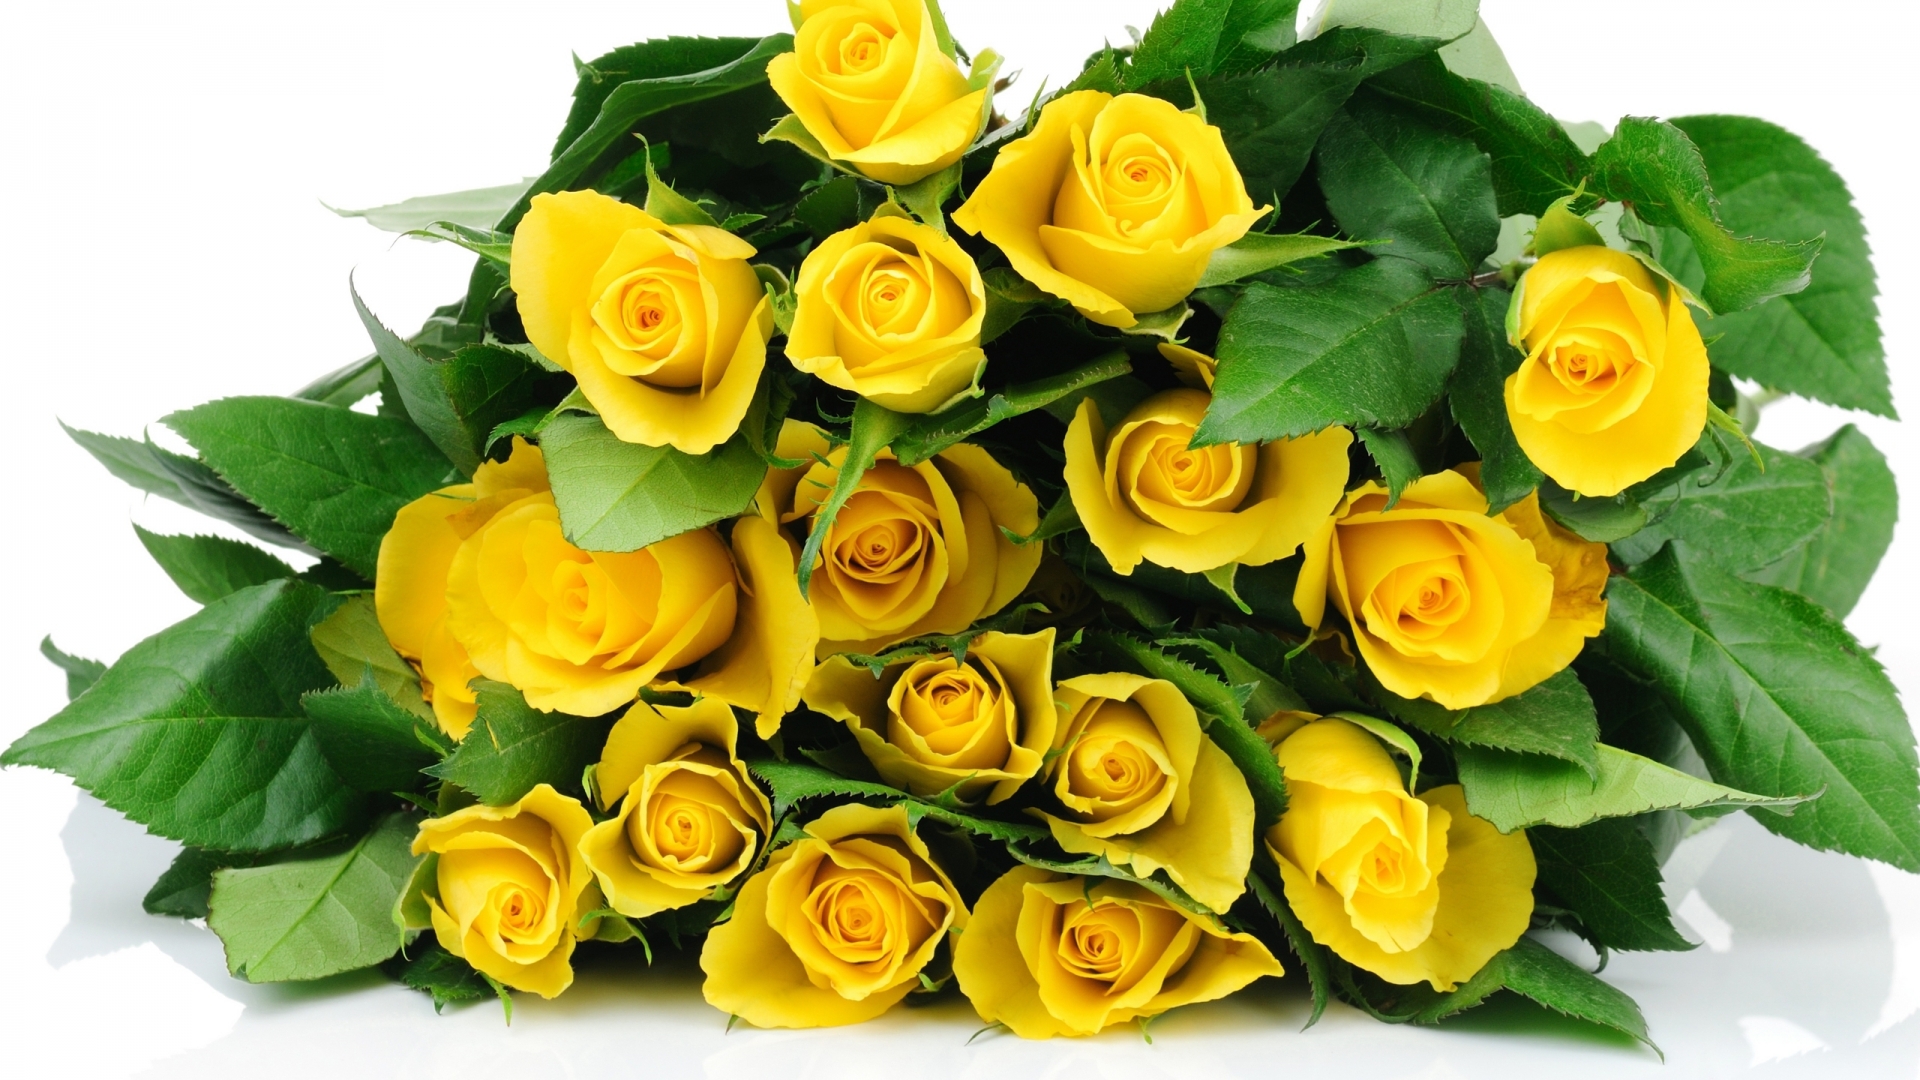 Yellow Roses Bucket for 1920 x 1080 HDTV 1080p resolution